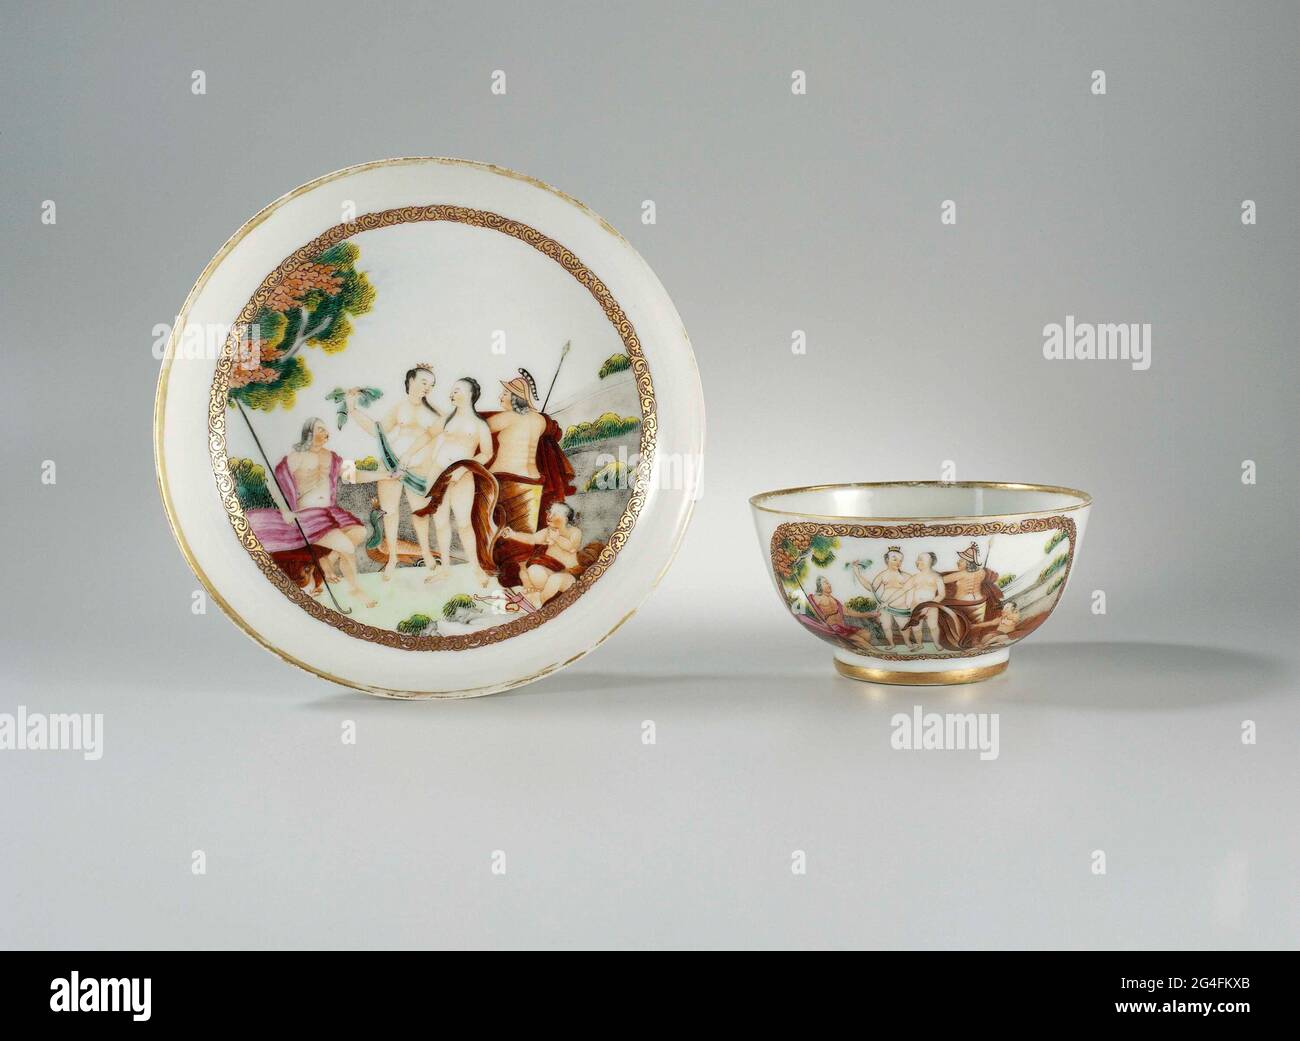 Cup and saucer of porcelain with straight wall, painted on the glaze in  blue, red, pink, green, yellow, black and gold. On the flat a medallion  with a representation of Paris